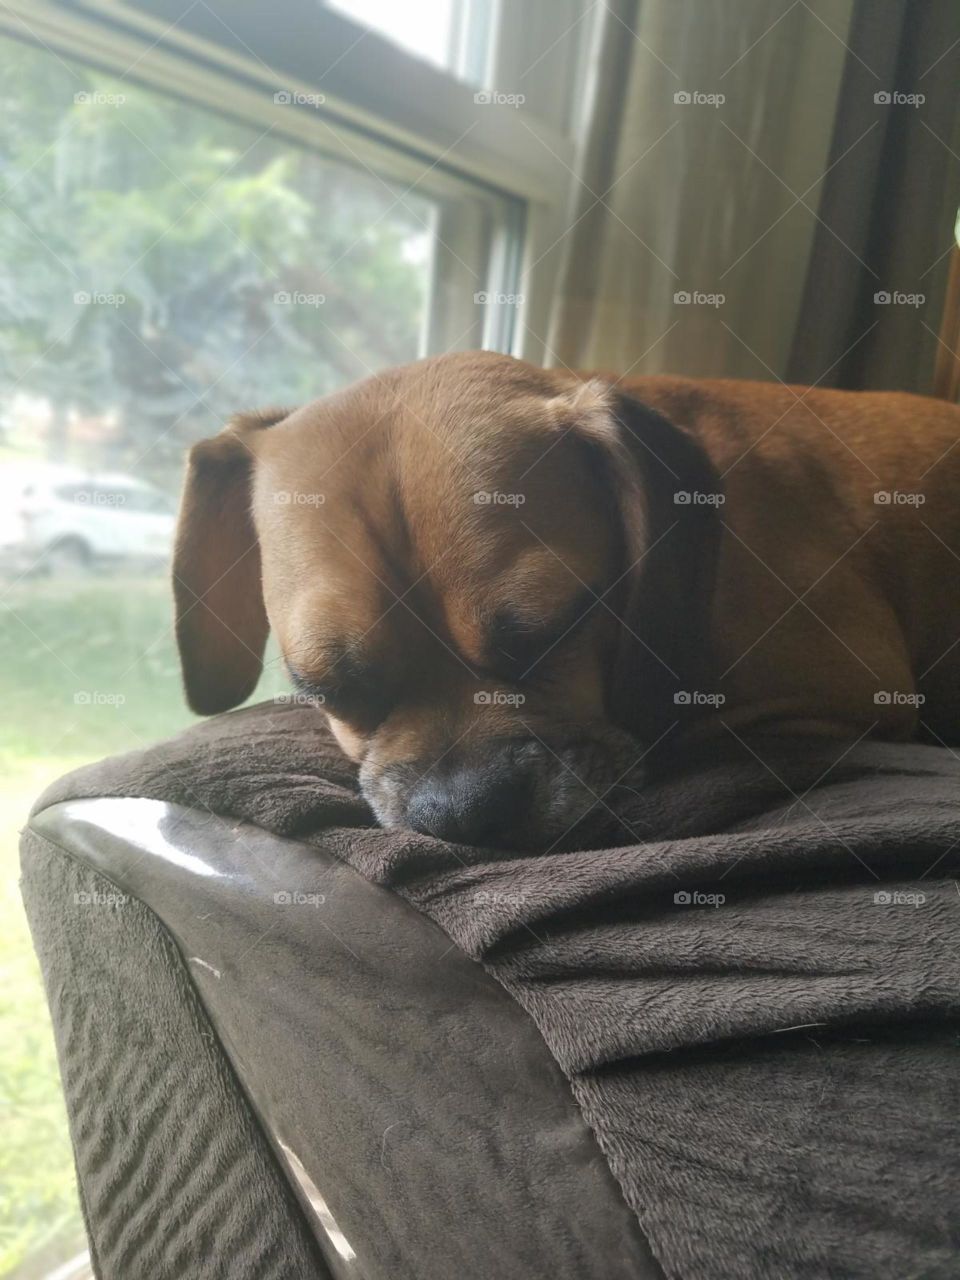 Puppy sleeping by the window